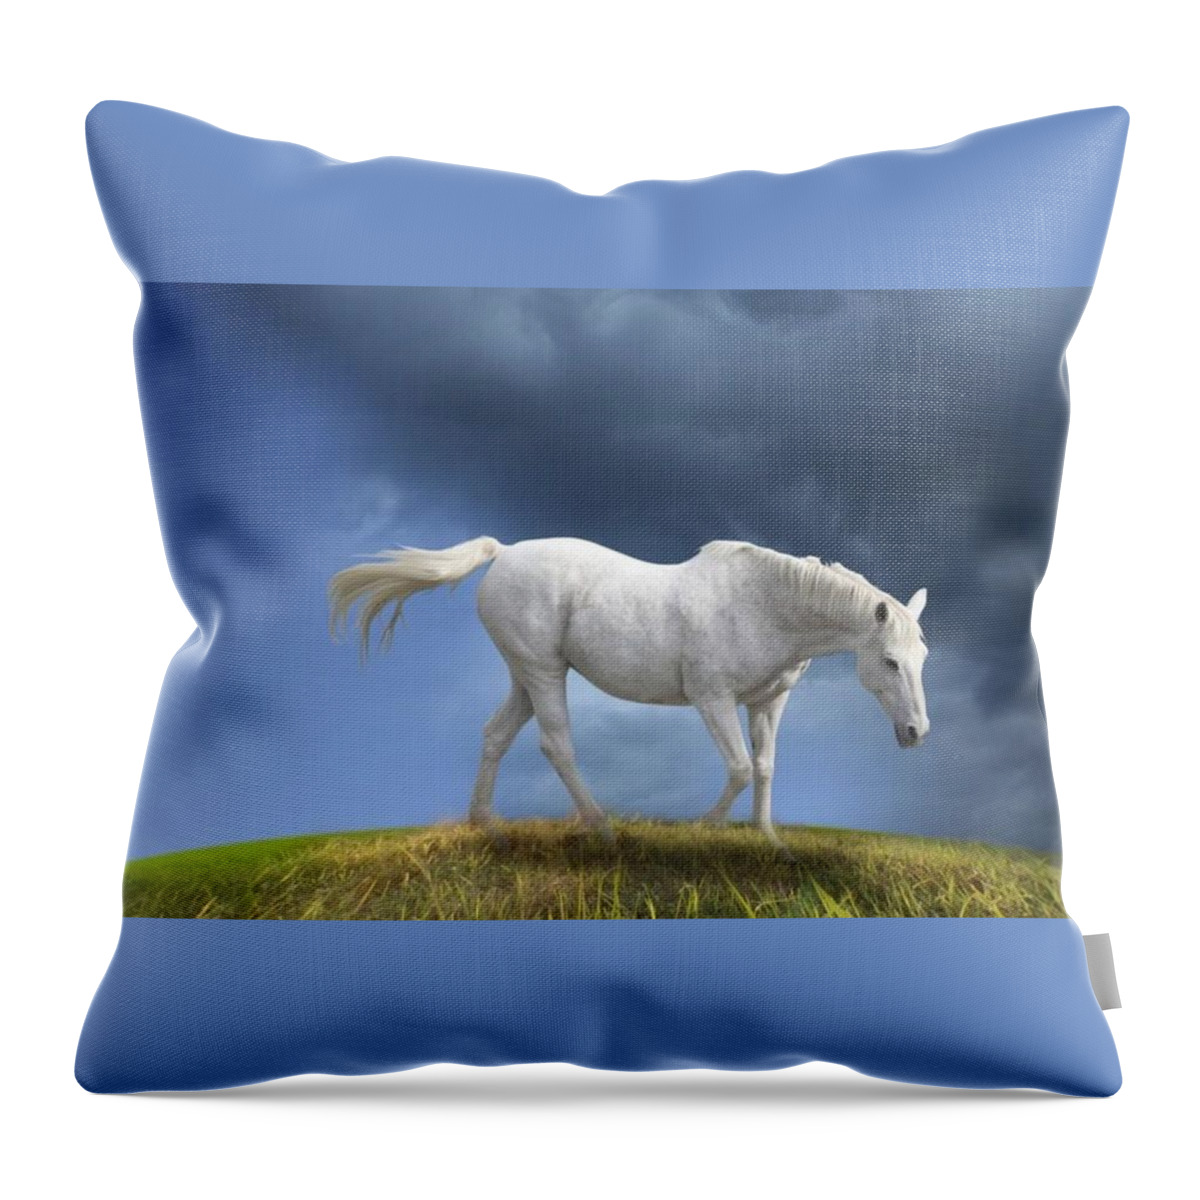 Horse Throw Pillow featuring the digital art Horse by Super Lovely